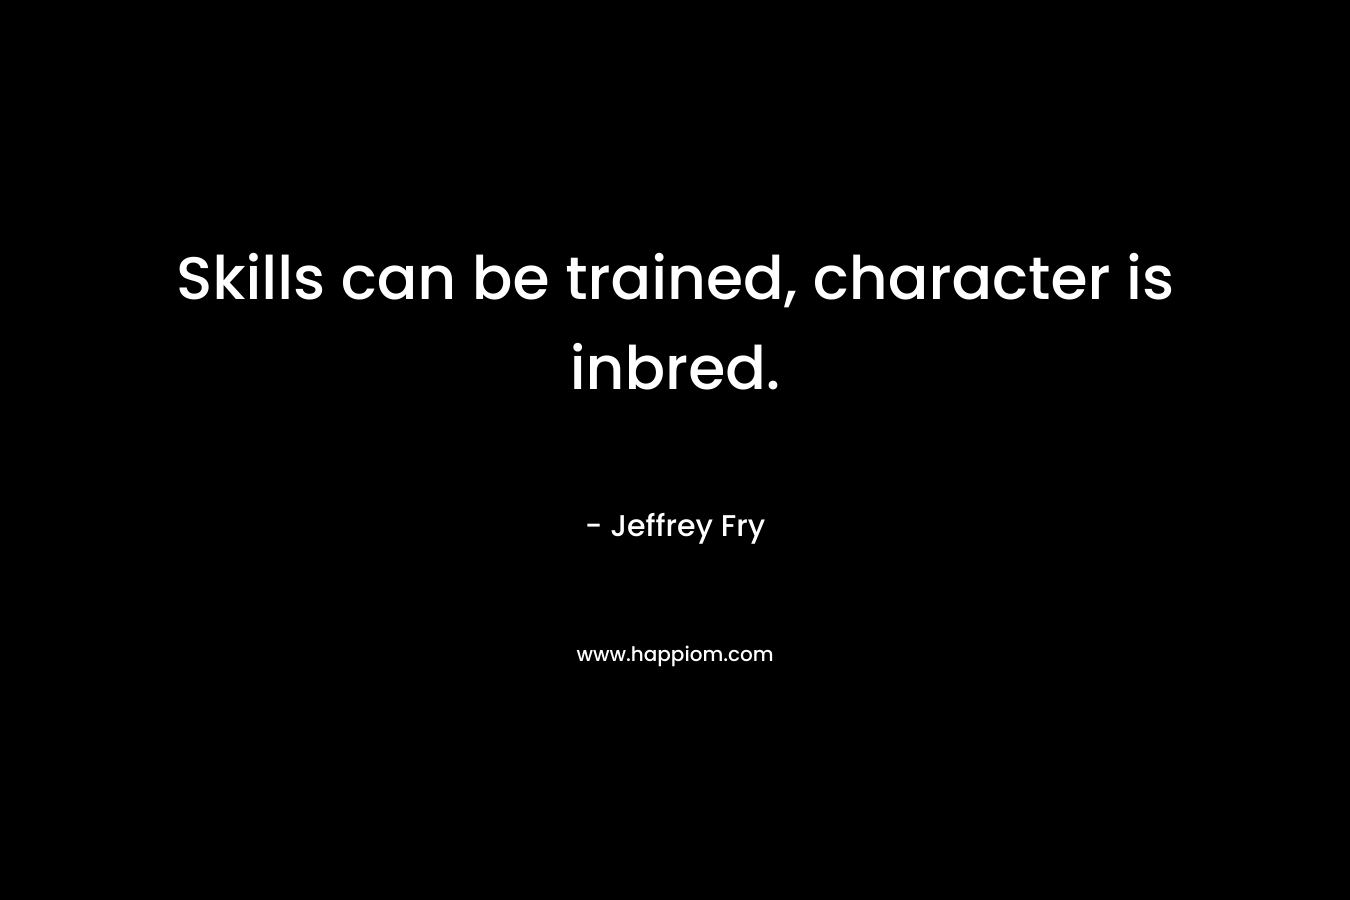 Skills can be trained, character is inbred. – Jeffrey Fry